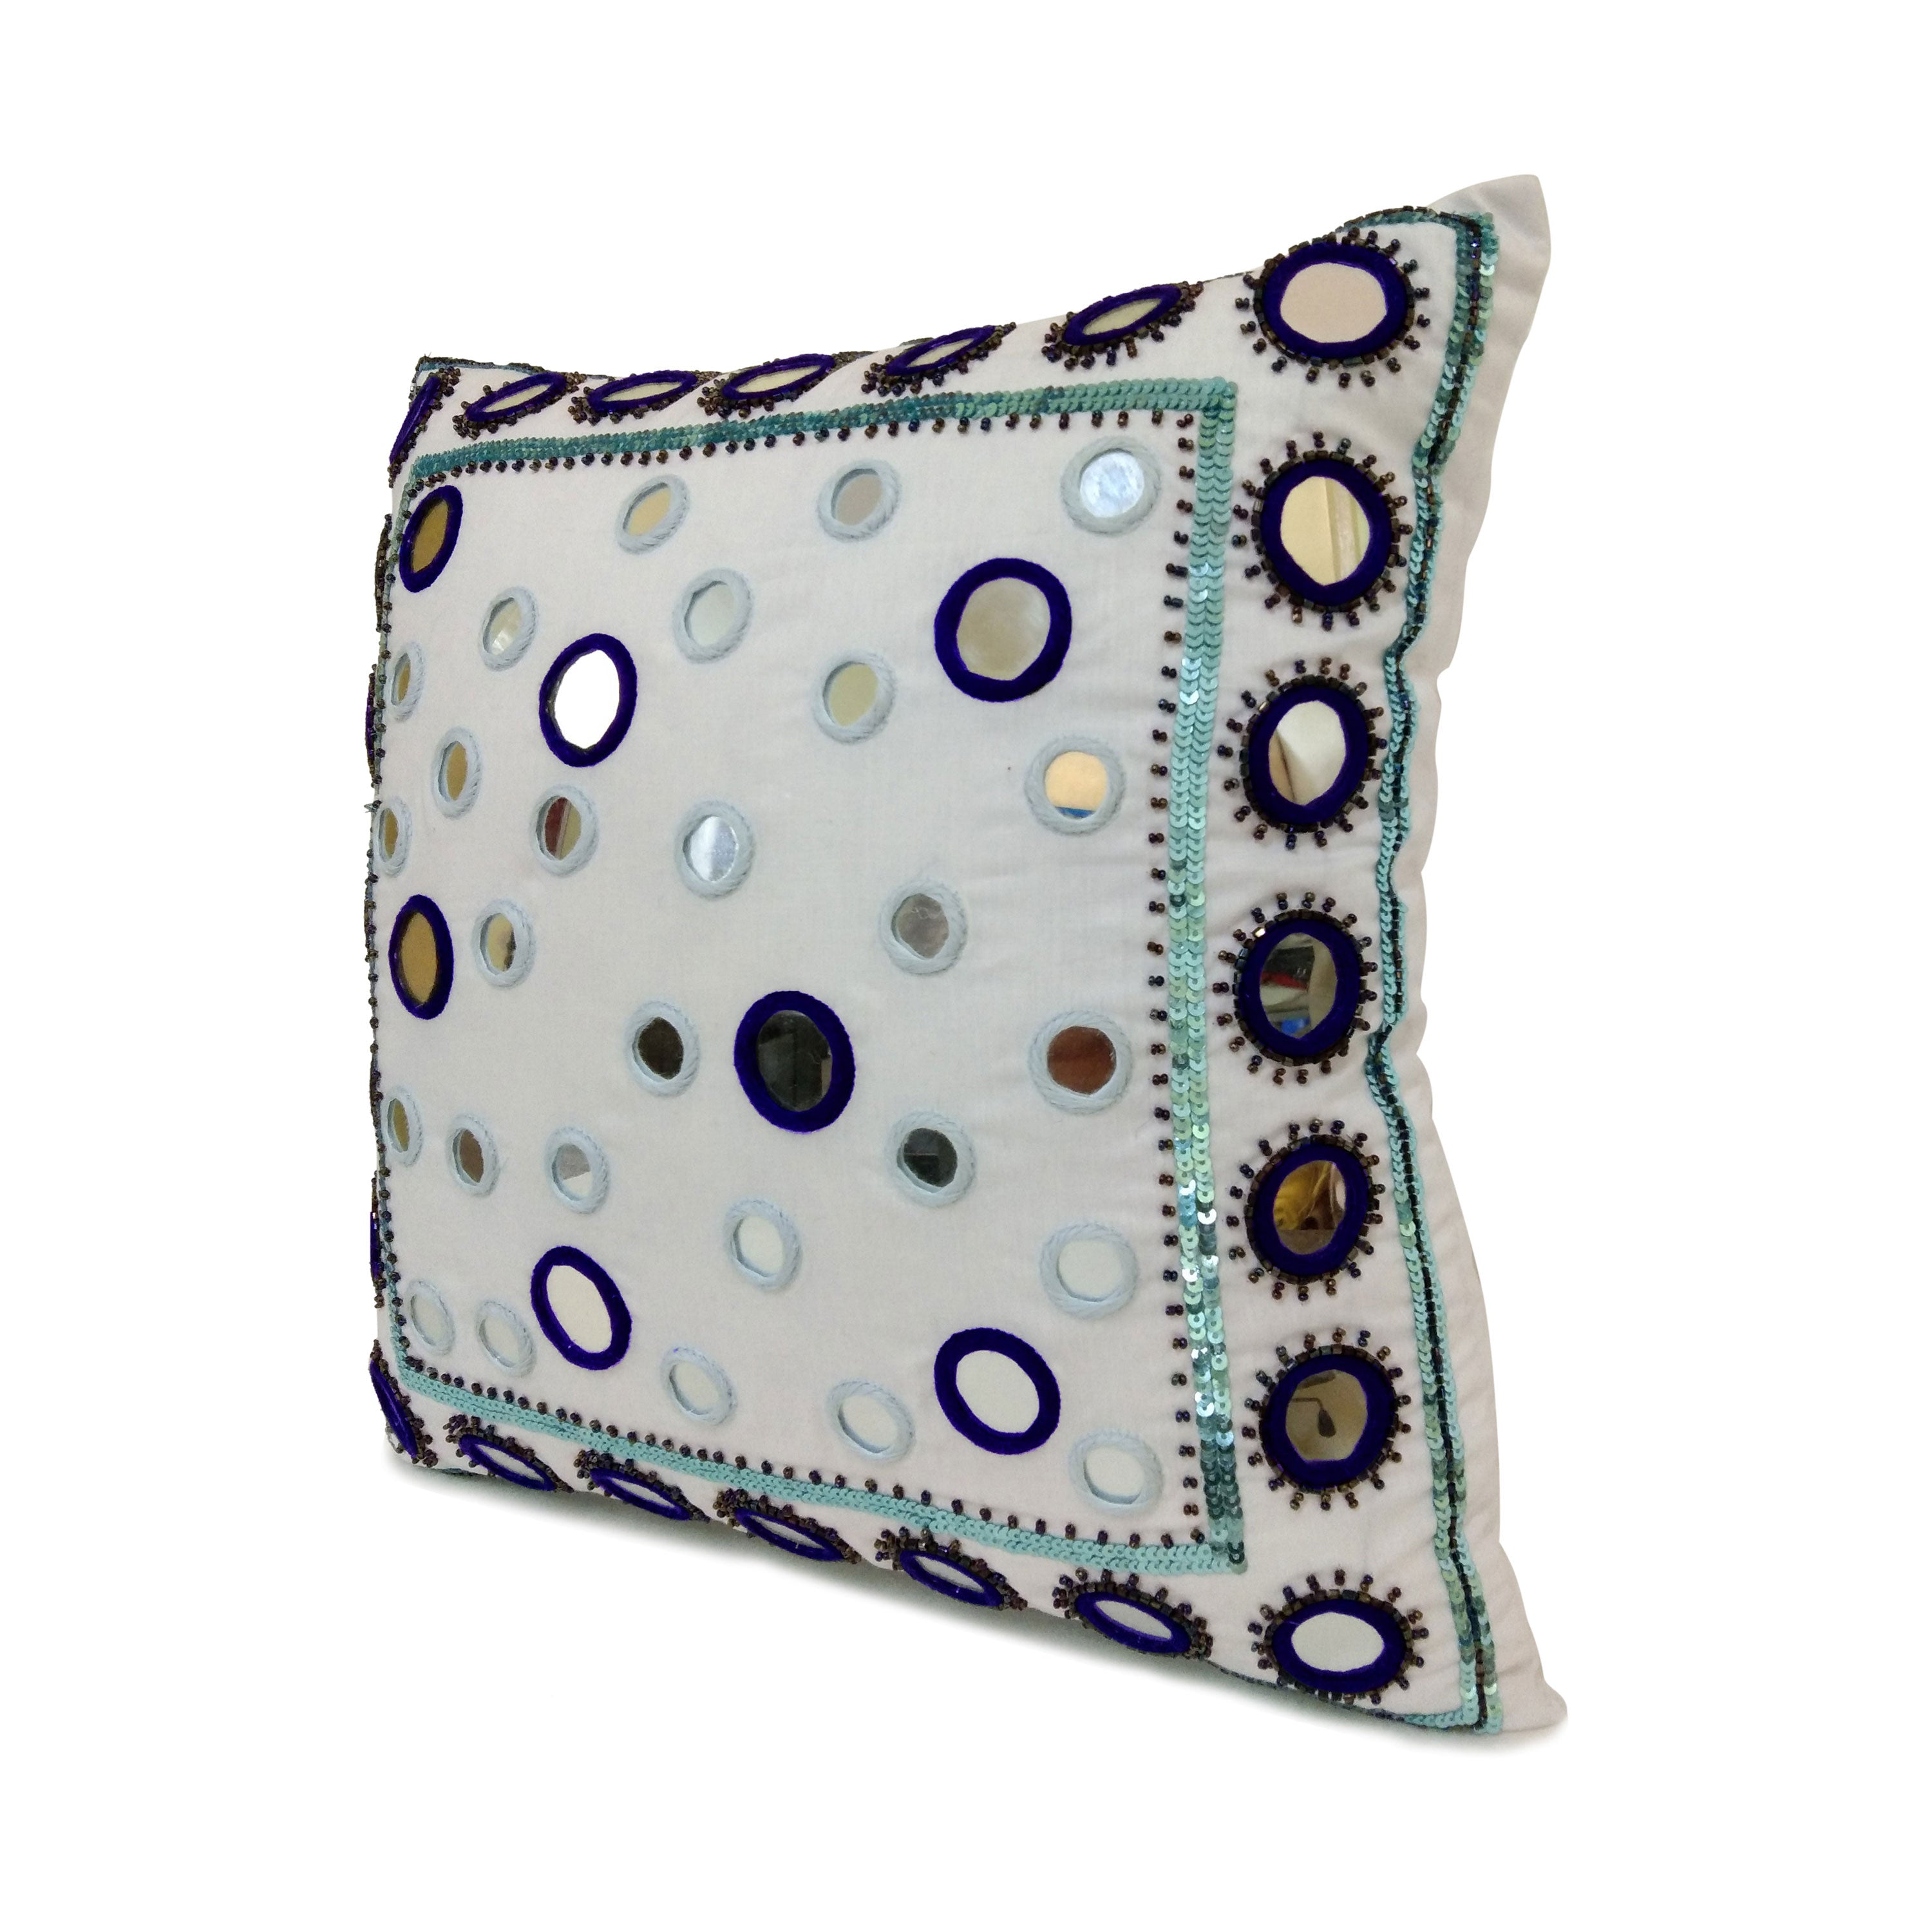 Mirror Pillow Cover in Blues